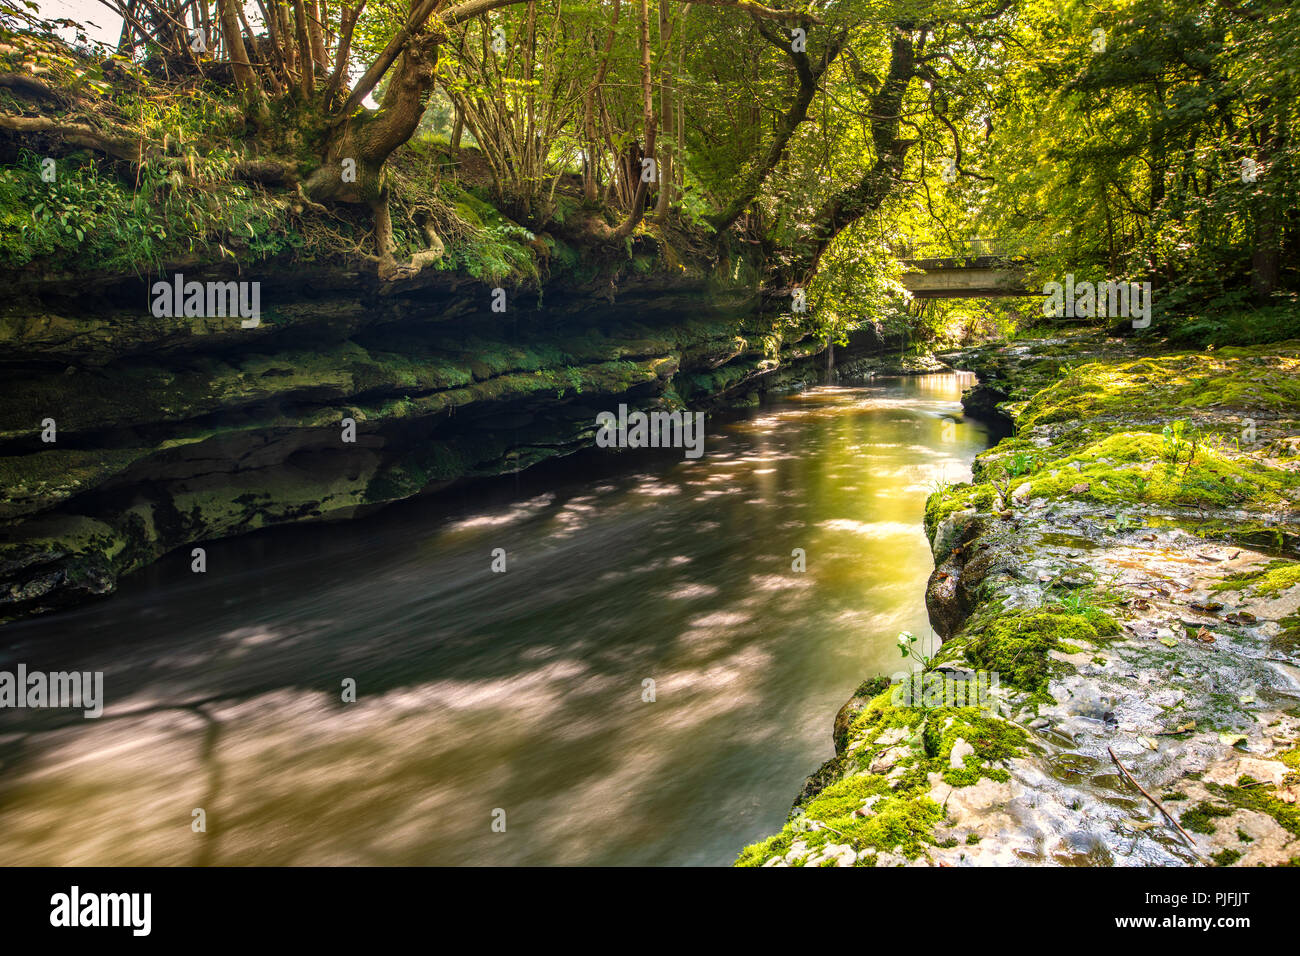 The River Kent at Sedgwick.  It flows through a narrow limestone gourge at this point, with tumbling waterfalls and dappled light through the trees. Stock Photo